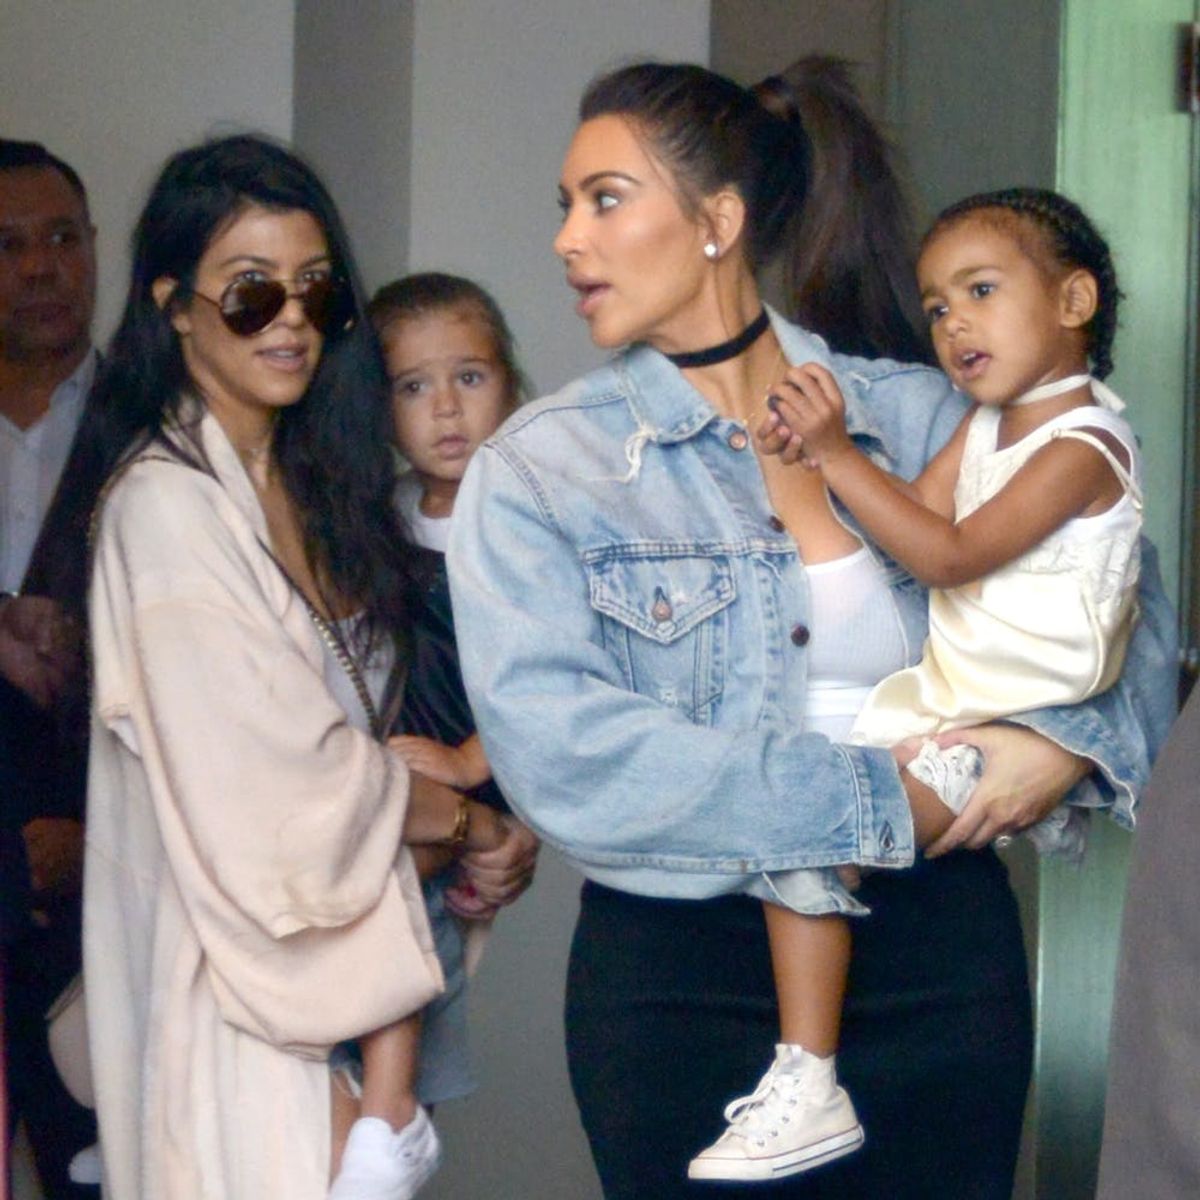 North West and Penelope Disick’s Moana-Themed Birthday Fête Is #PartyGoals